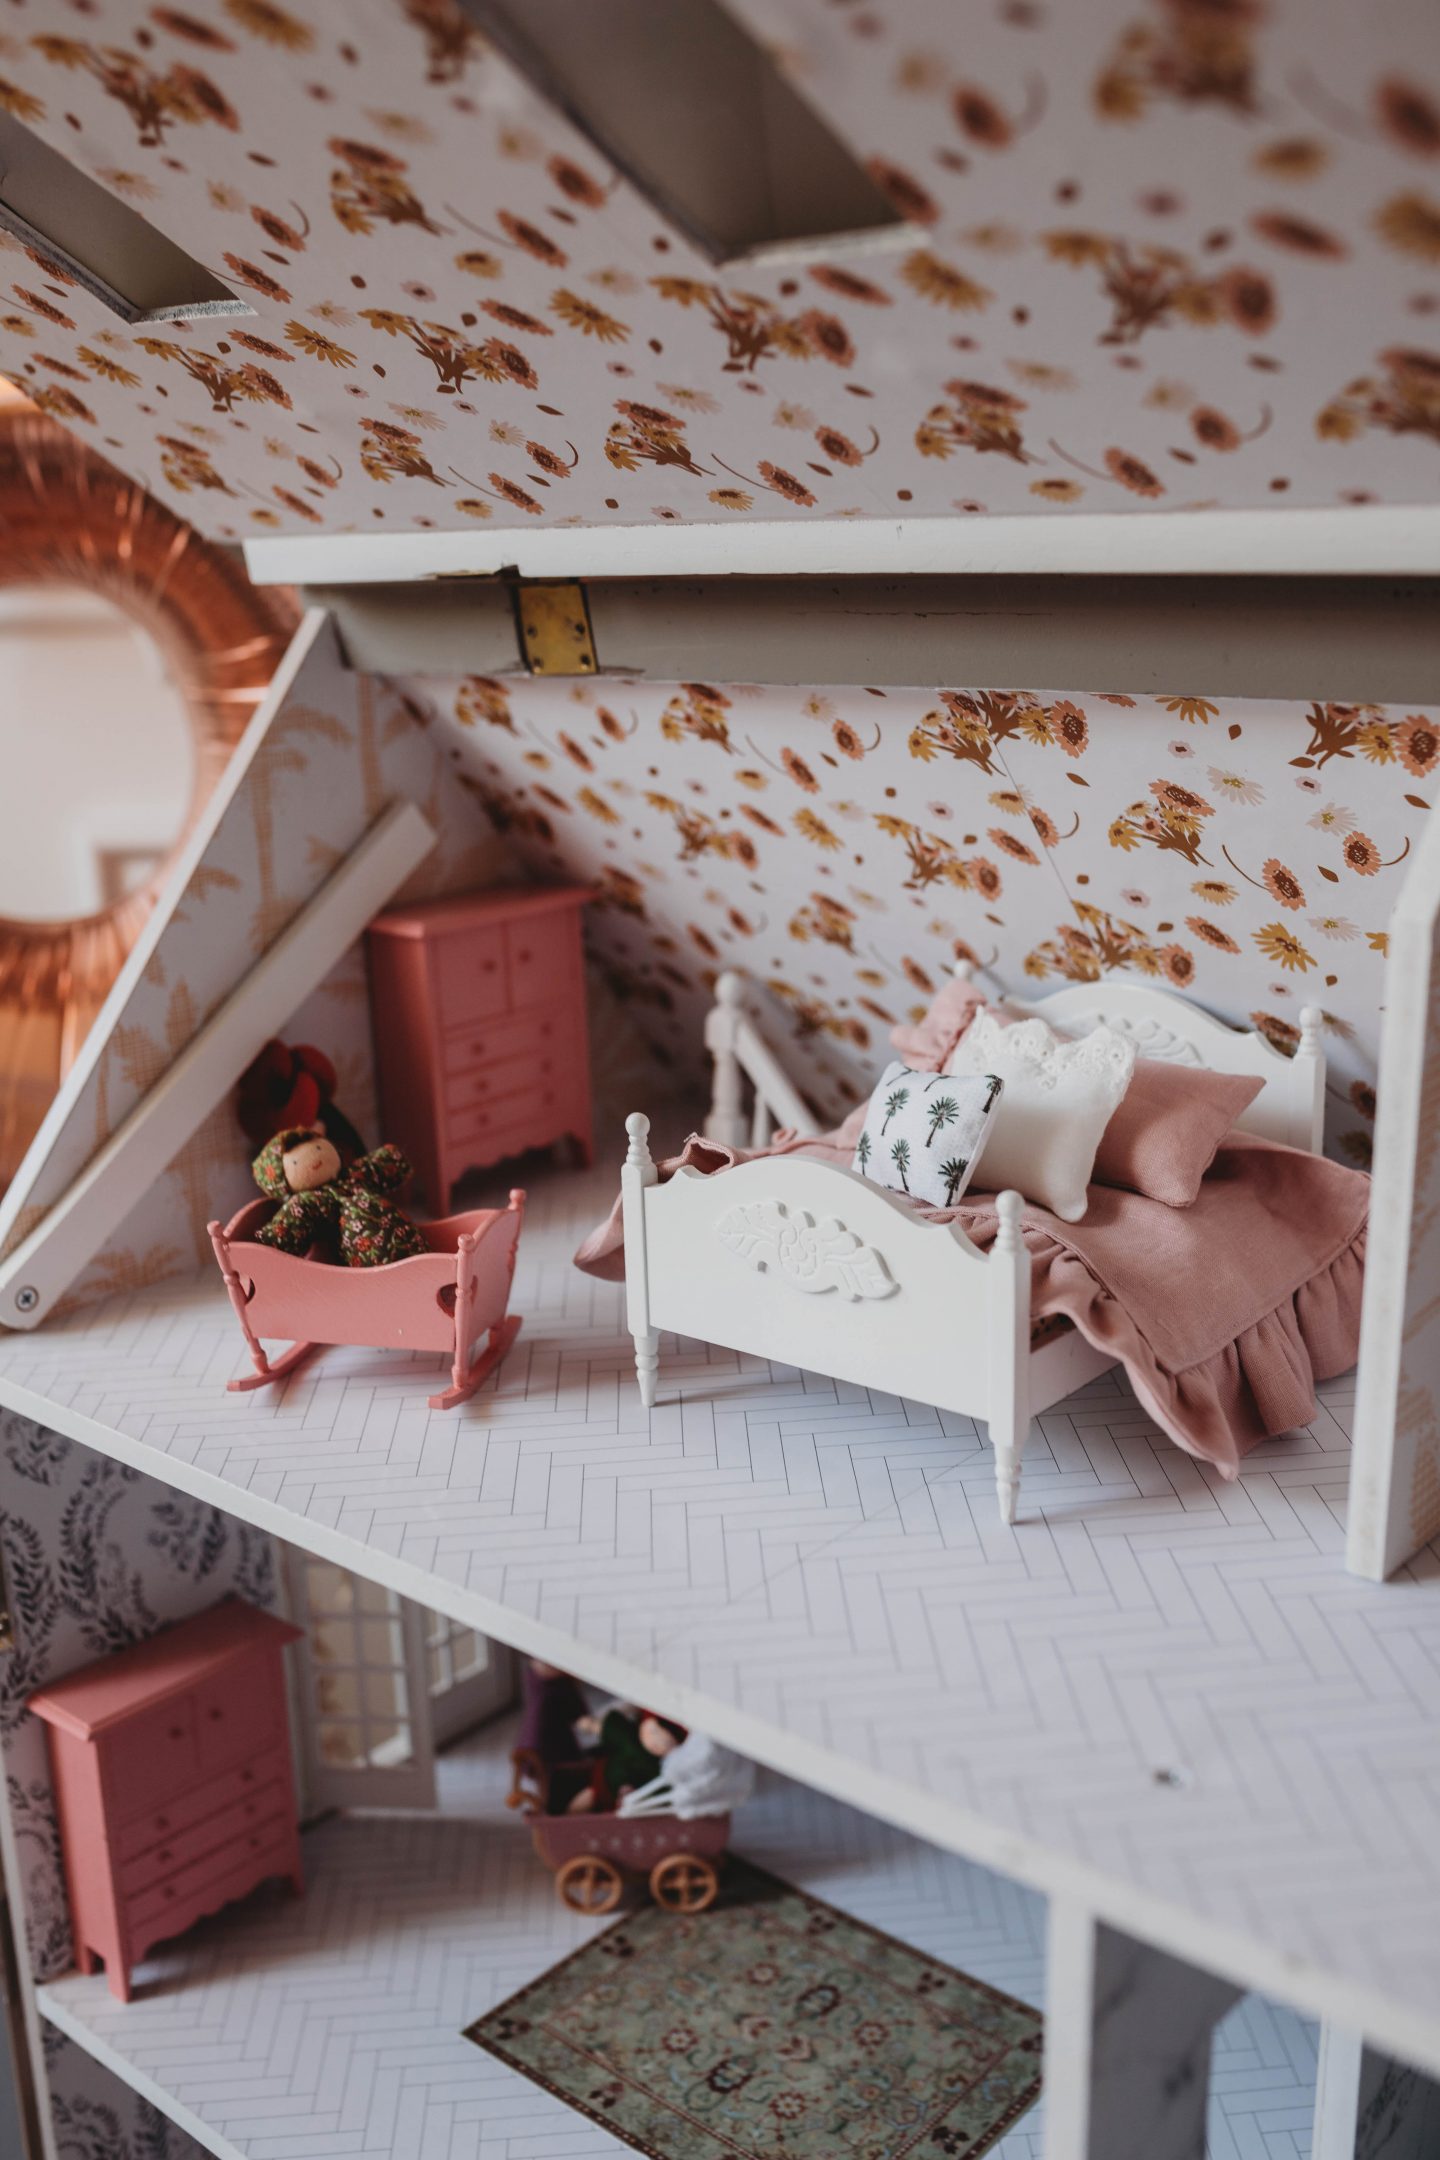 second hand dolls houses